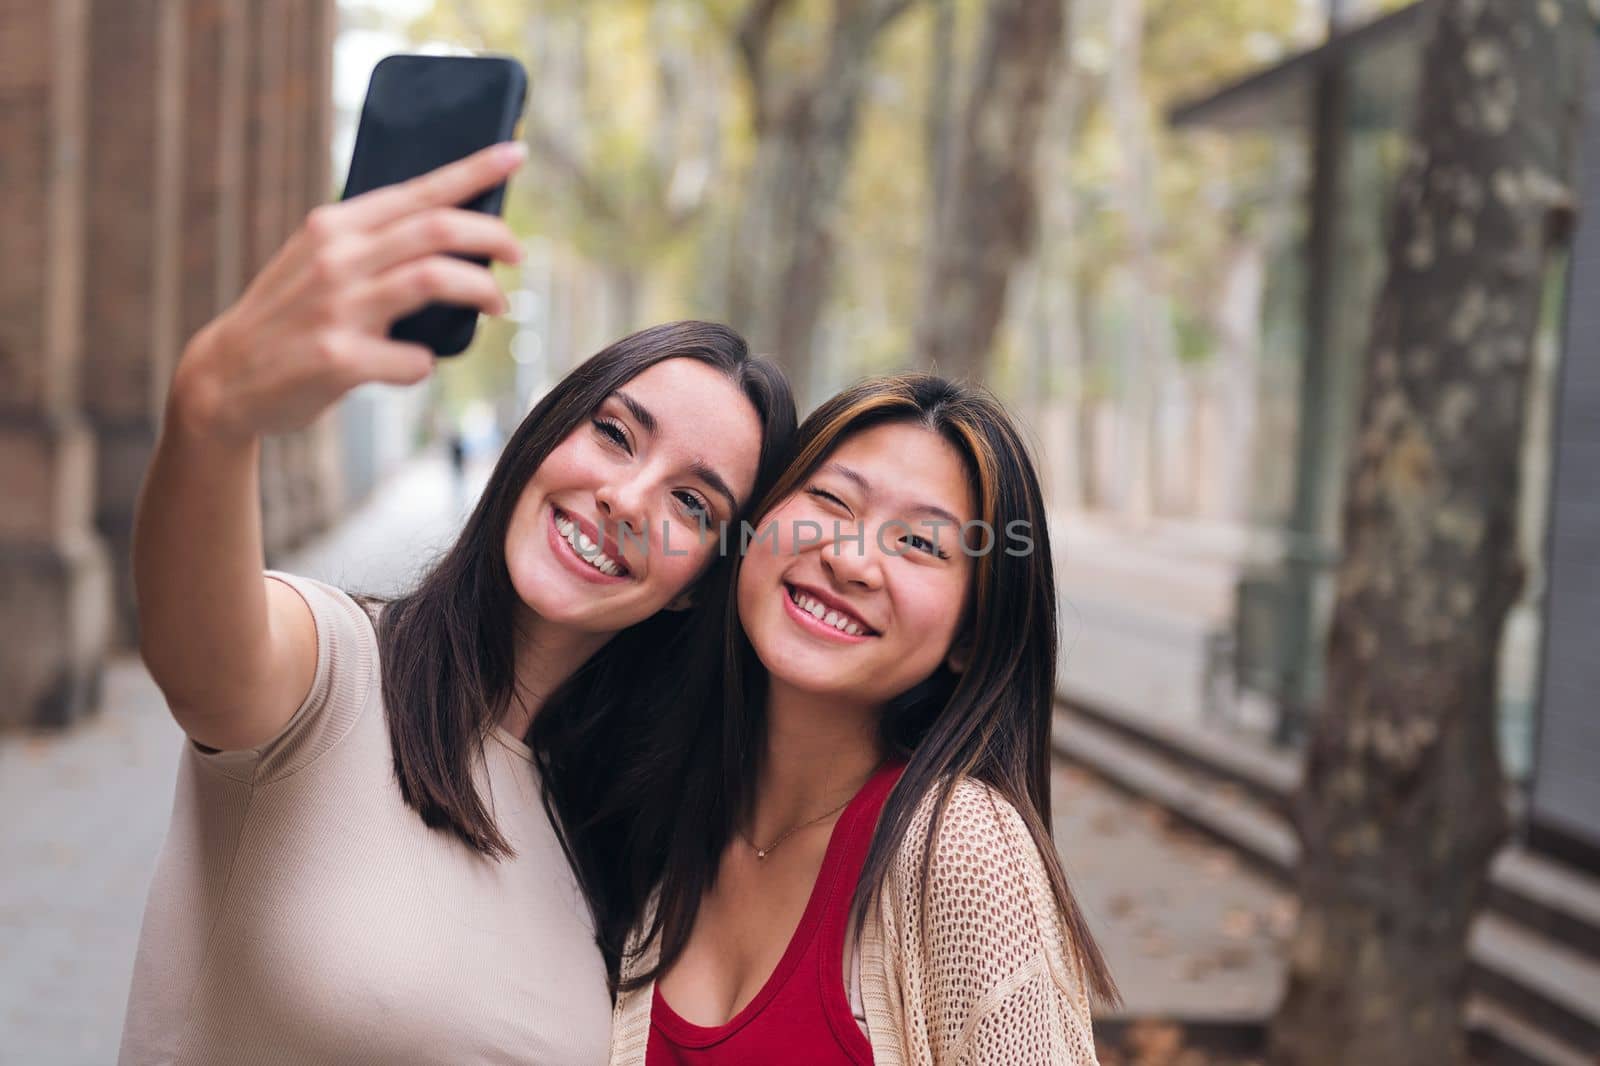 two young women smiling and having fun taking a selfie photo with a cell phone, concept of friendship and technology of communication